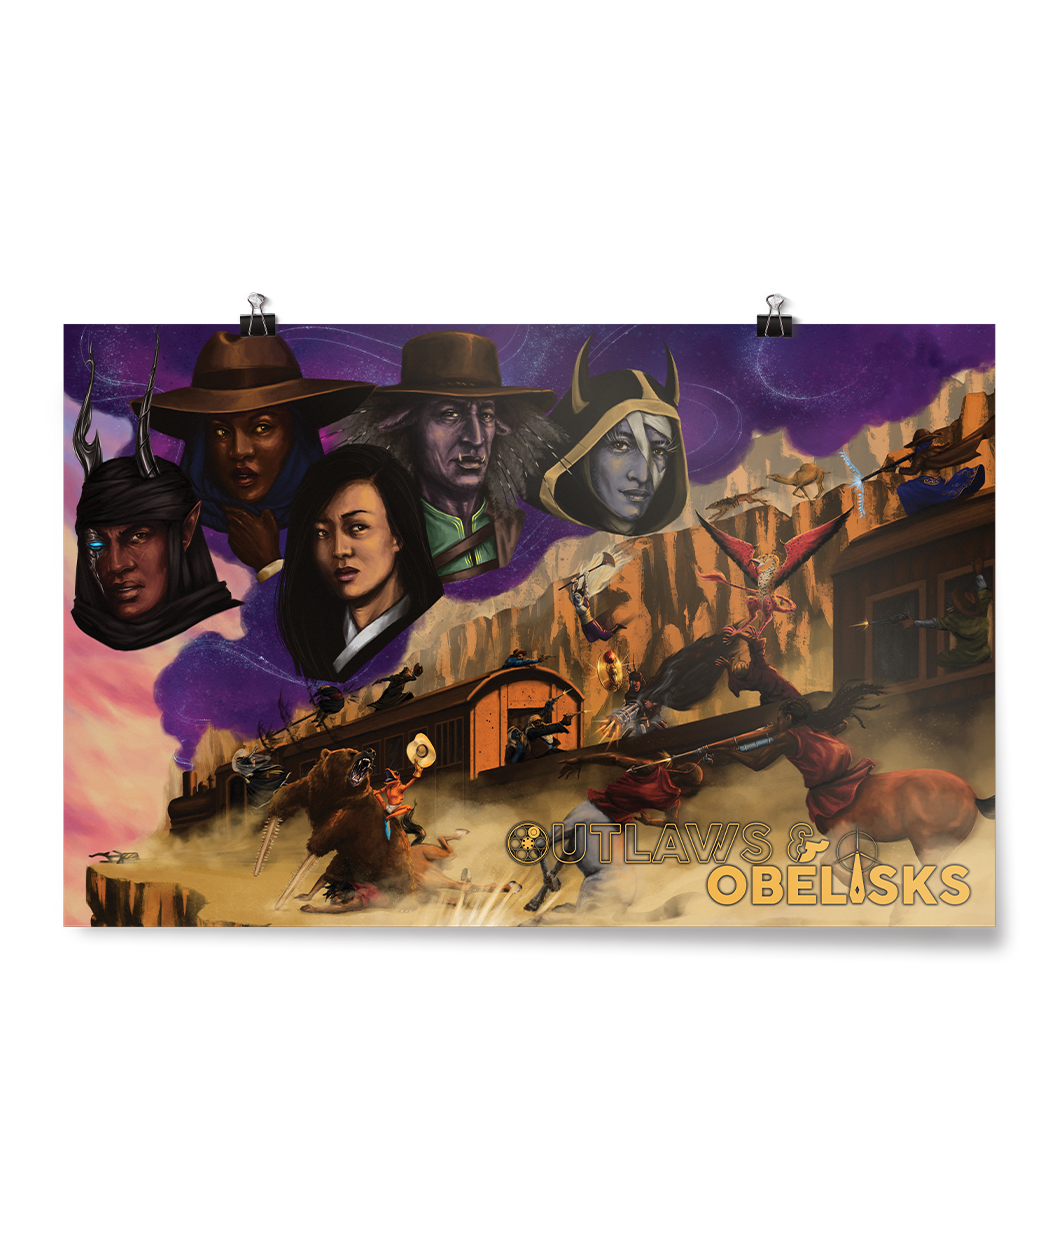 A poster featuring the heads of five different characters from "Outlaws & Obelisks" from Three Black Halflings. Below the heads is a fight scene on a cliff. 